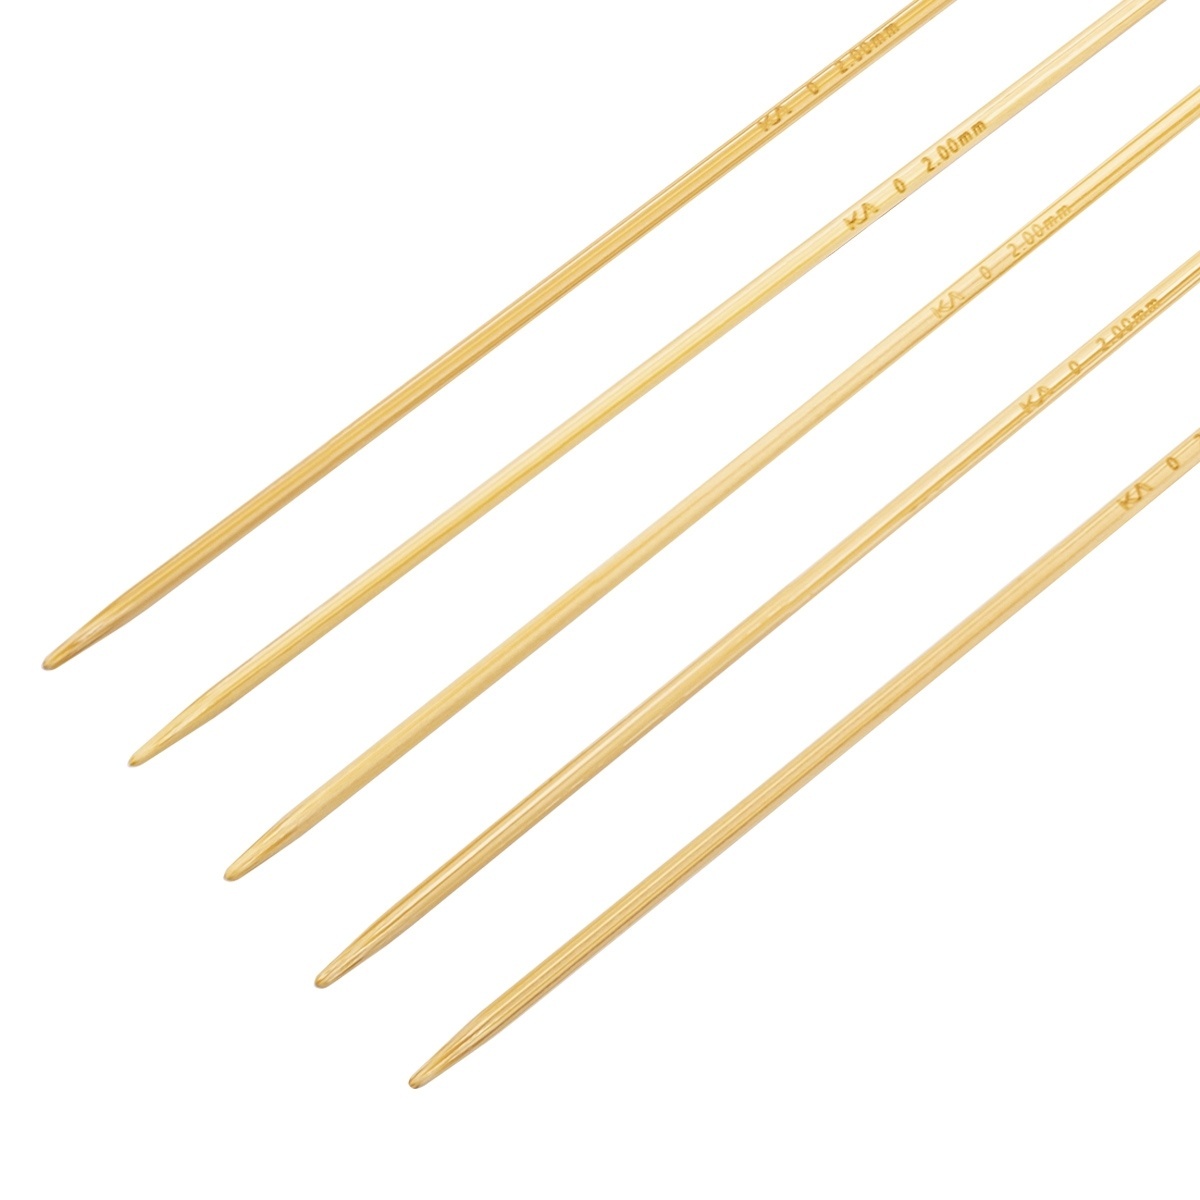 Double-pointed knitting needles, Seeknit, 2mm фото 3